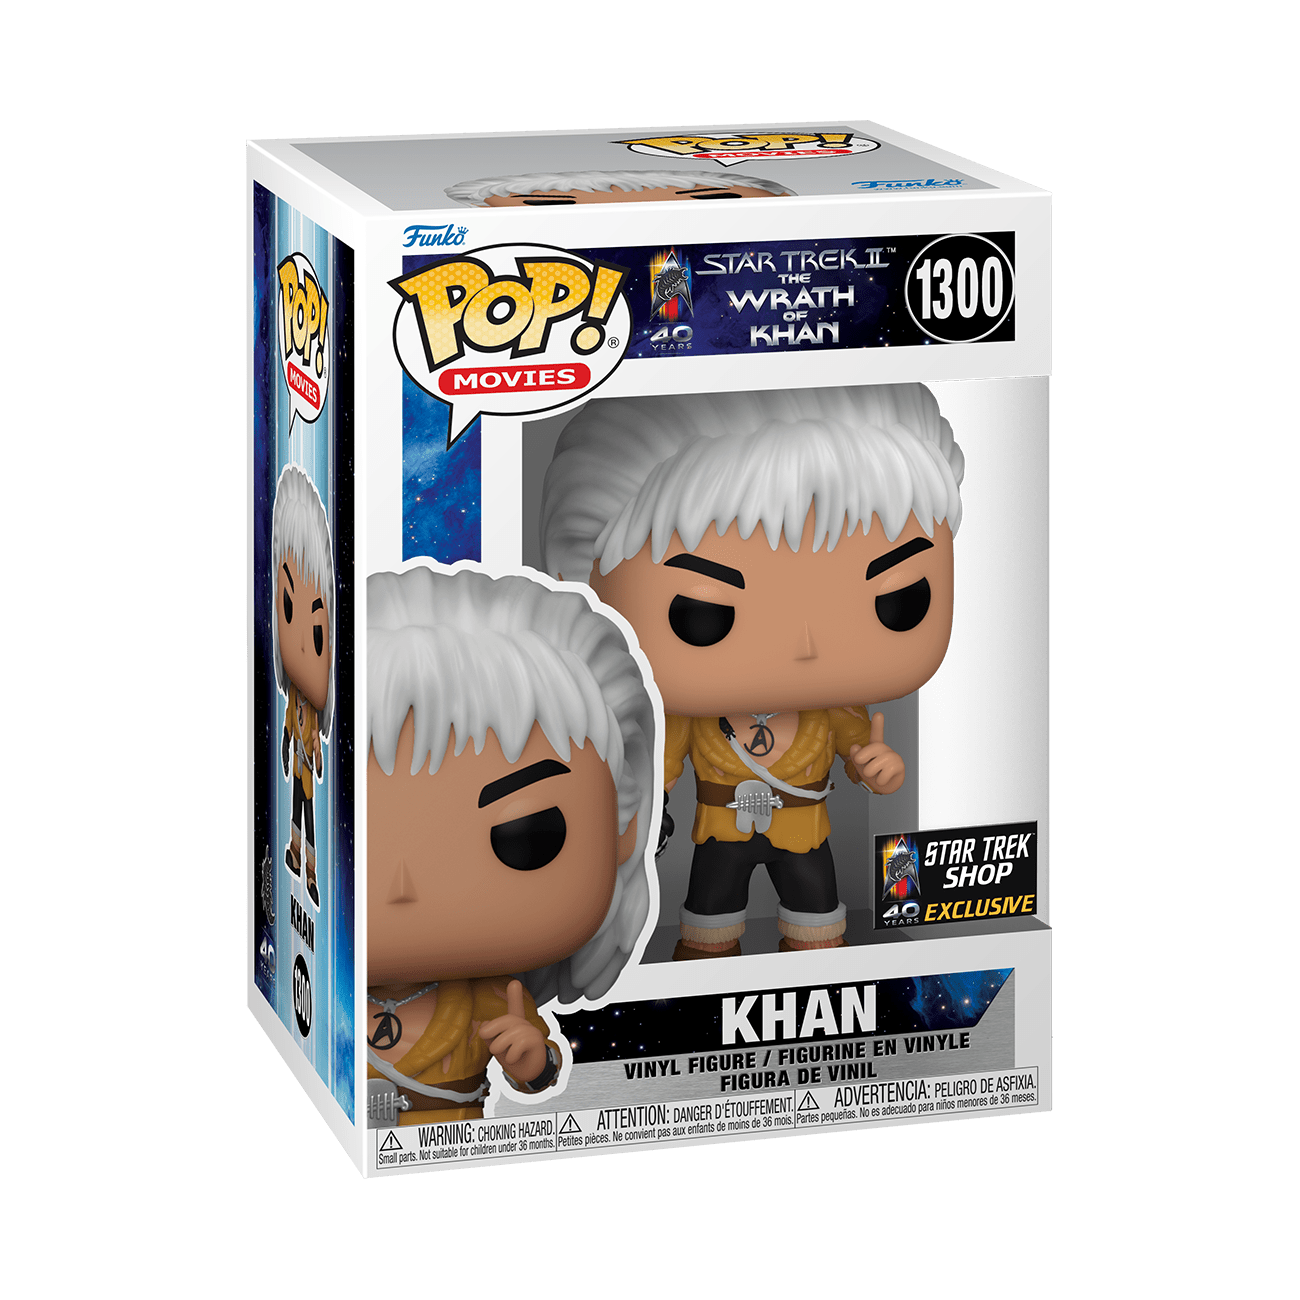 Star Trek II: The Wrath of Khan Funko POP! Exclusive - 40th Anniversary Limited Edition Figure - Paramount Shop